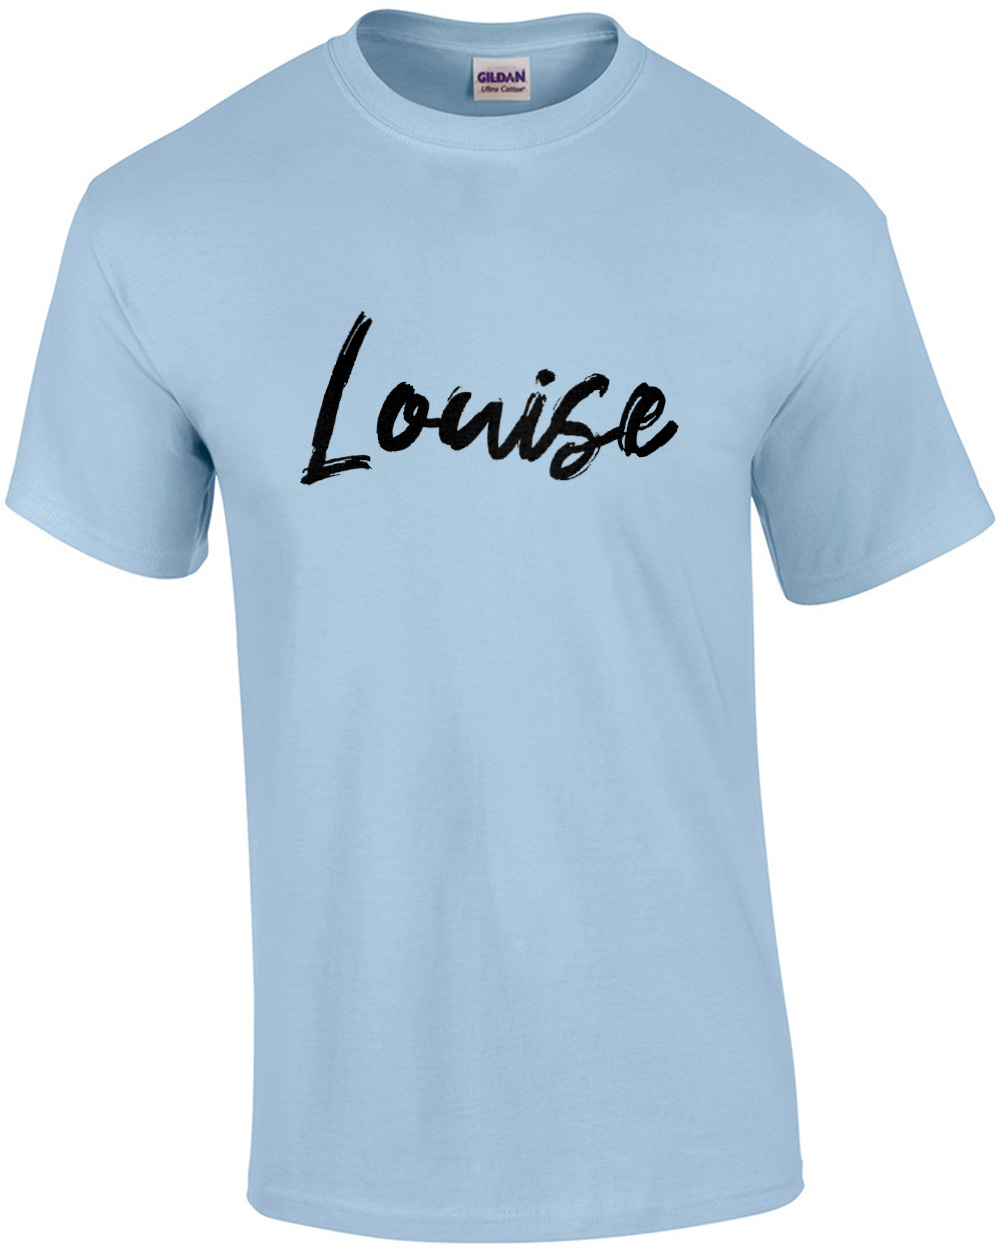 Louise - Thelma and Louise - 90's T-Shirt | eBay